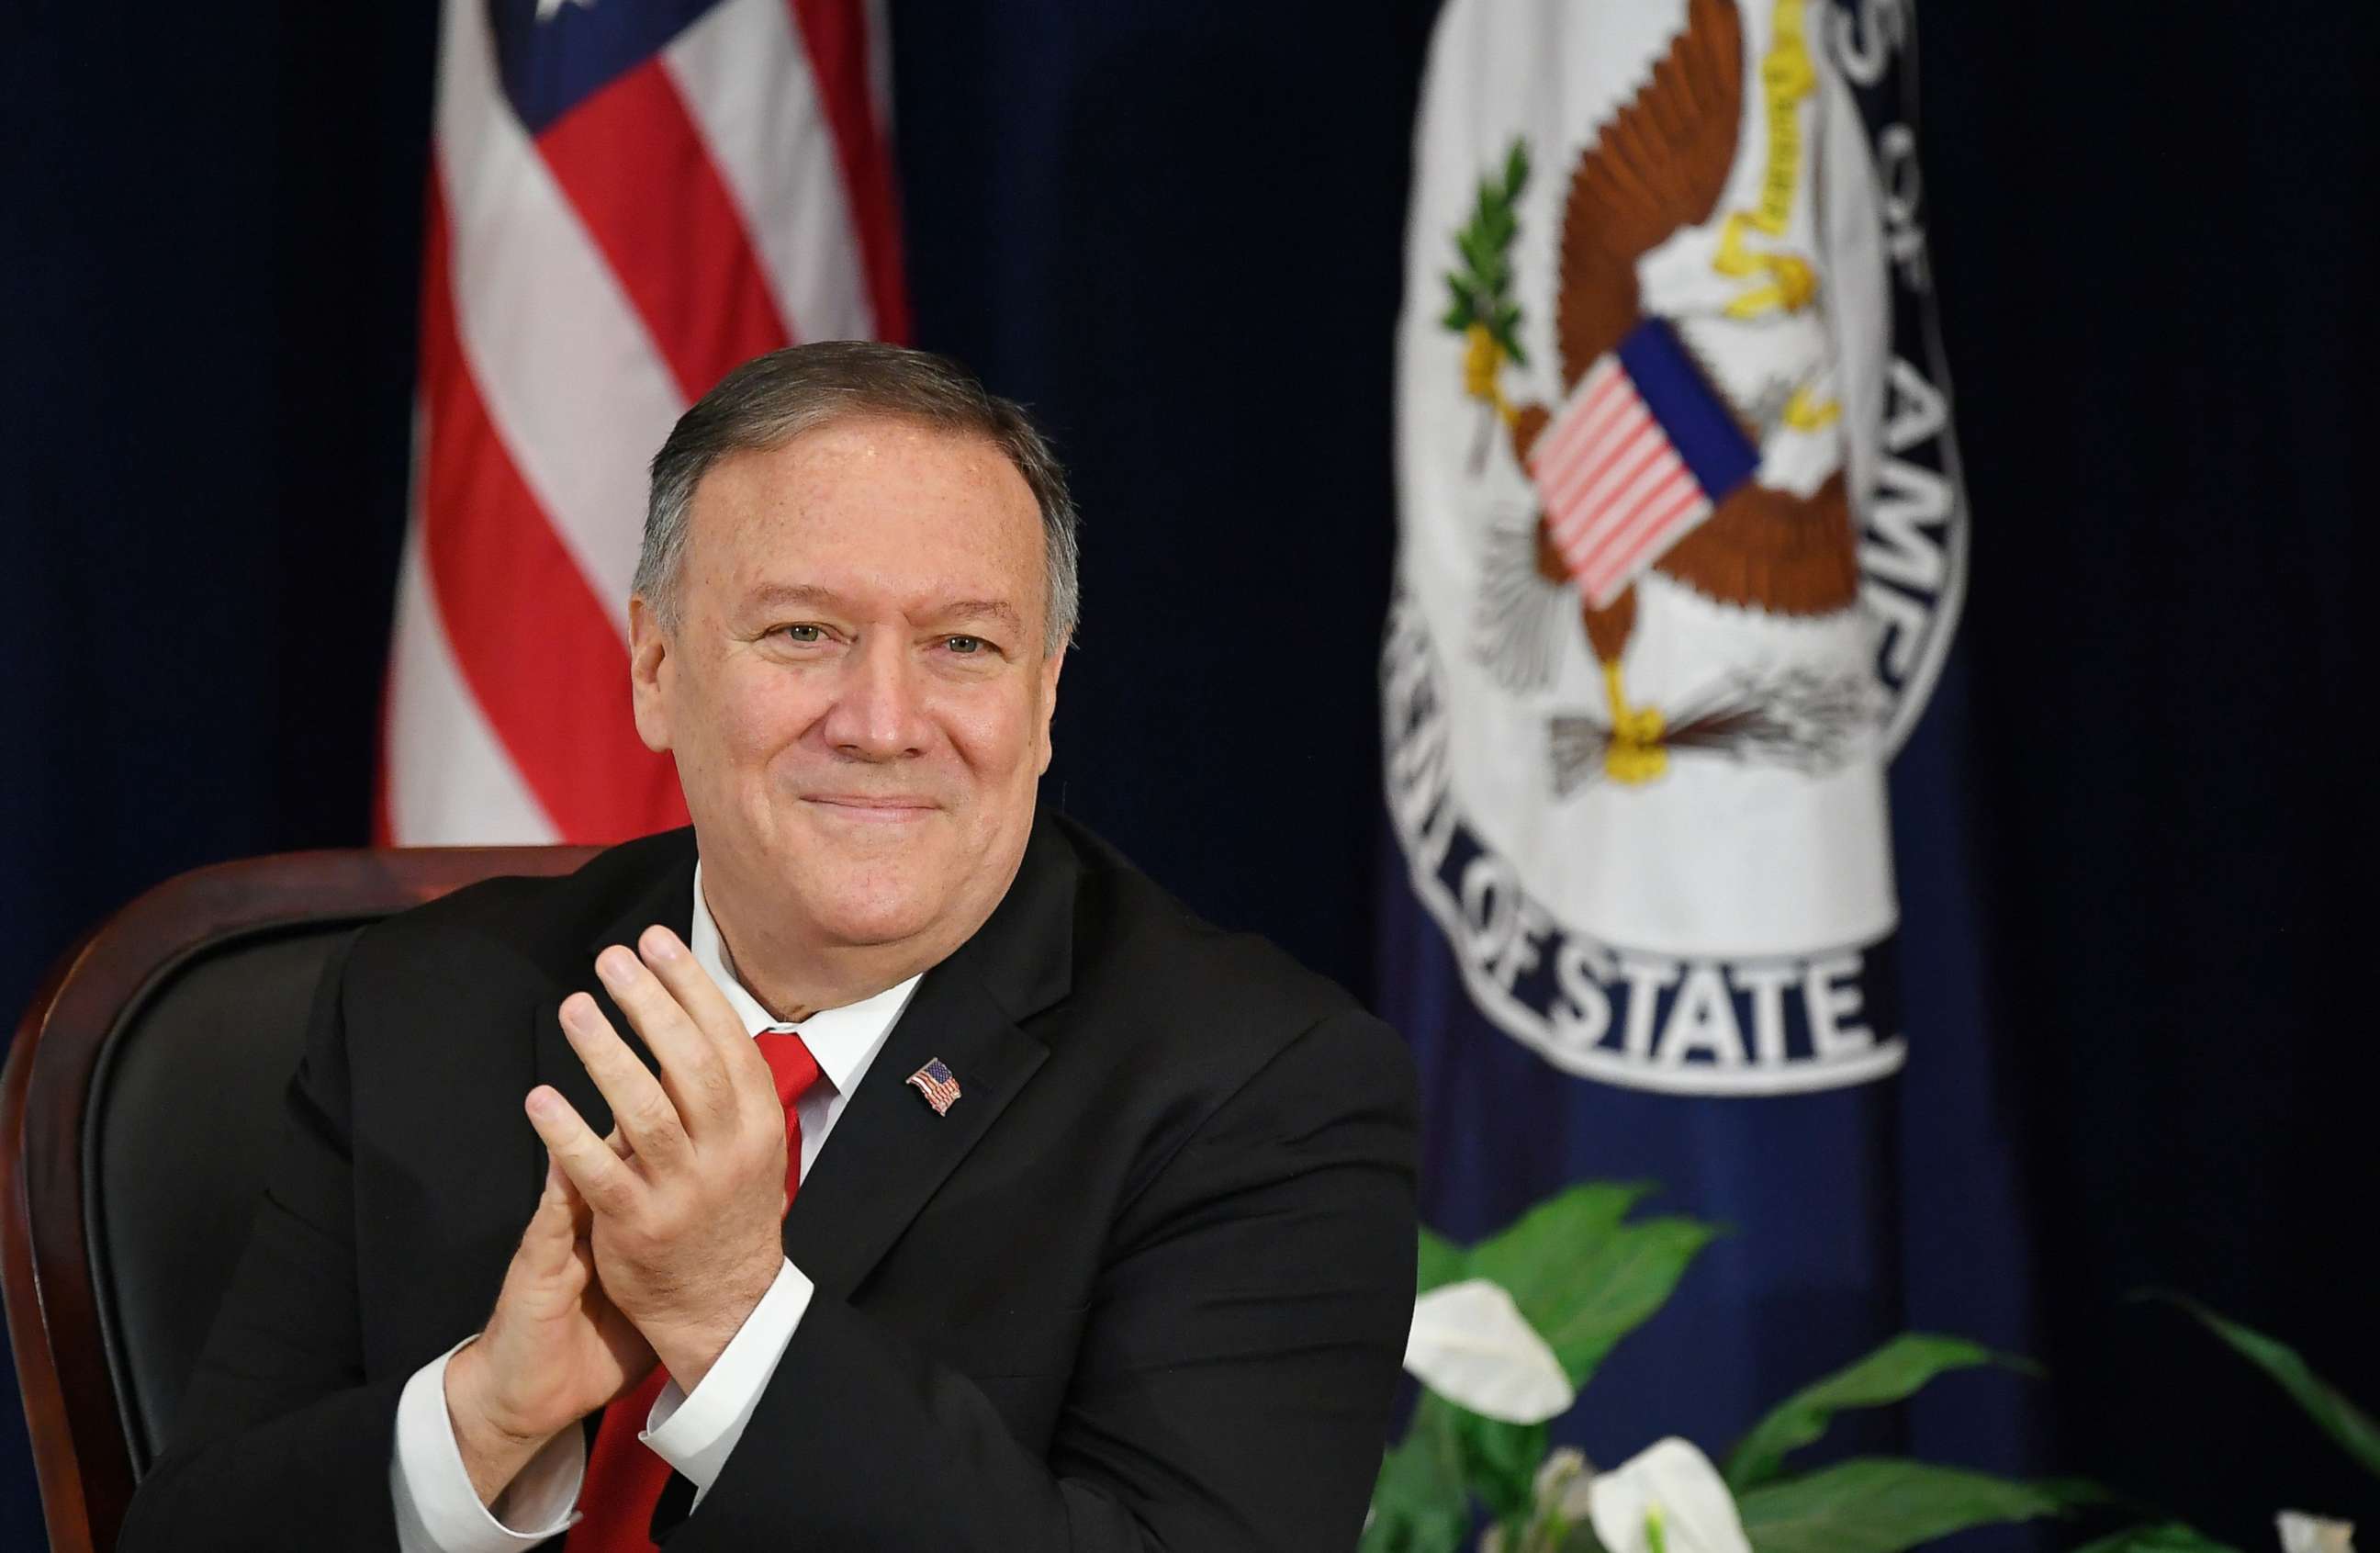 PHOTO: US Secretary of State Mike Pompeo applauds before giving a speech at the Heroes of US Diplomacy launch event at the State Department in Washington, DC on September 13, 2019.